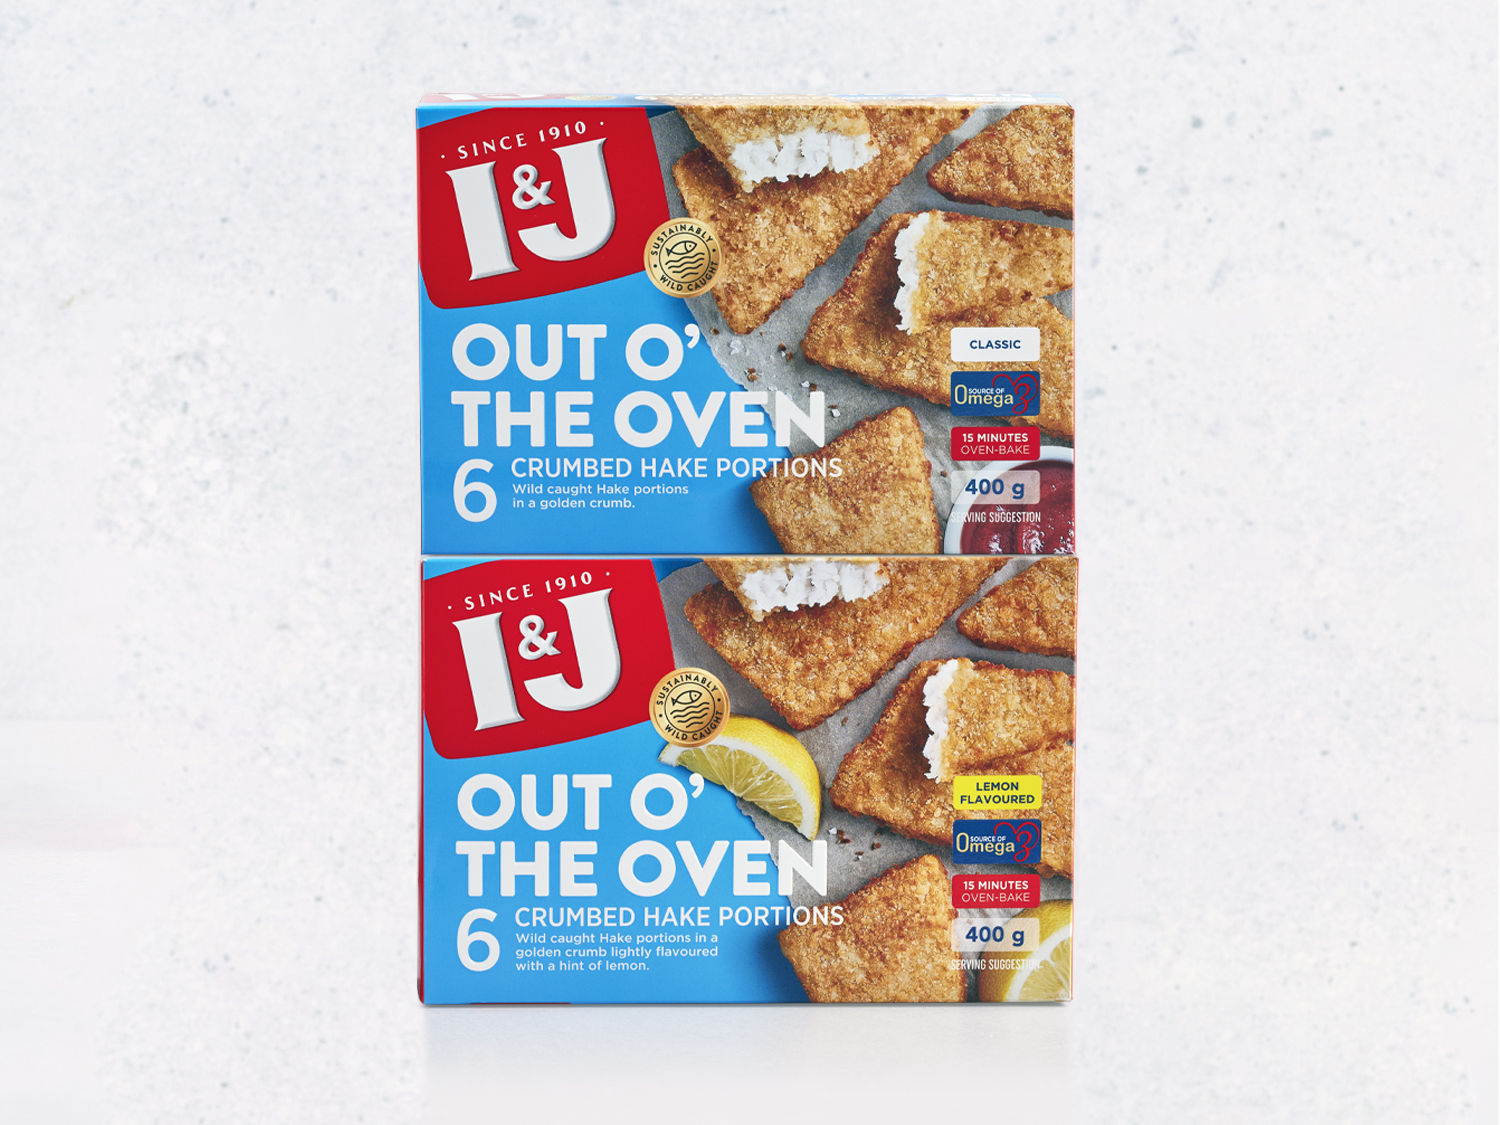 I&J Out 'O The Oven